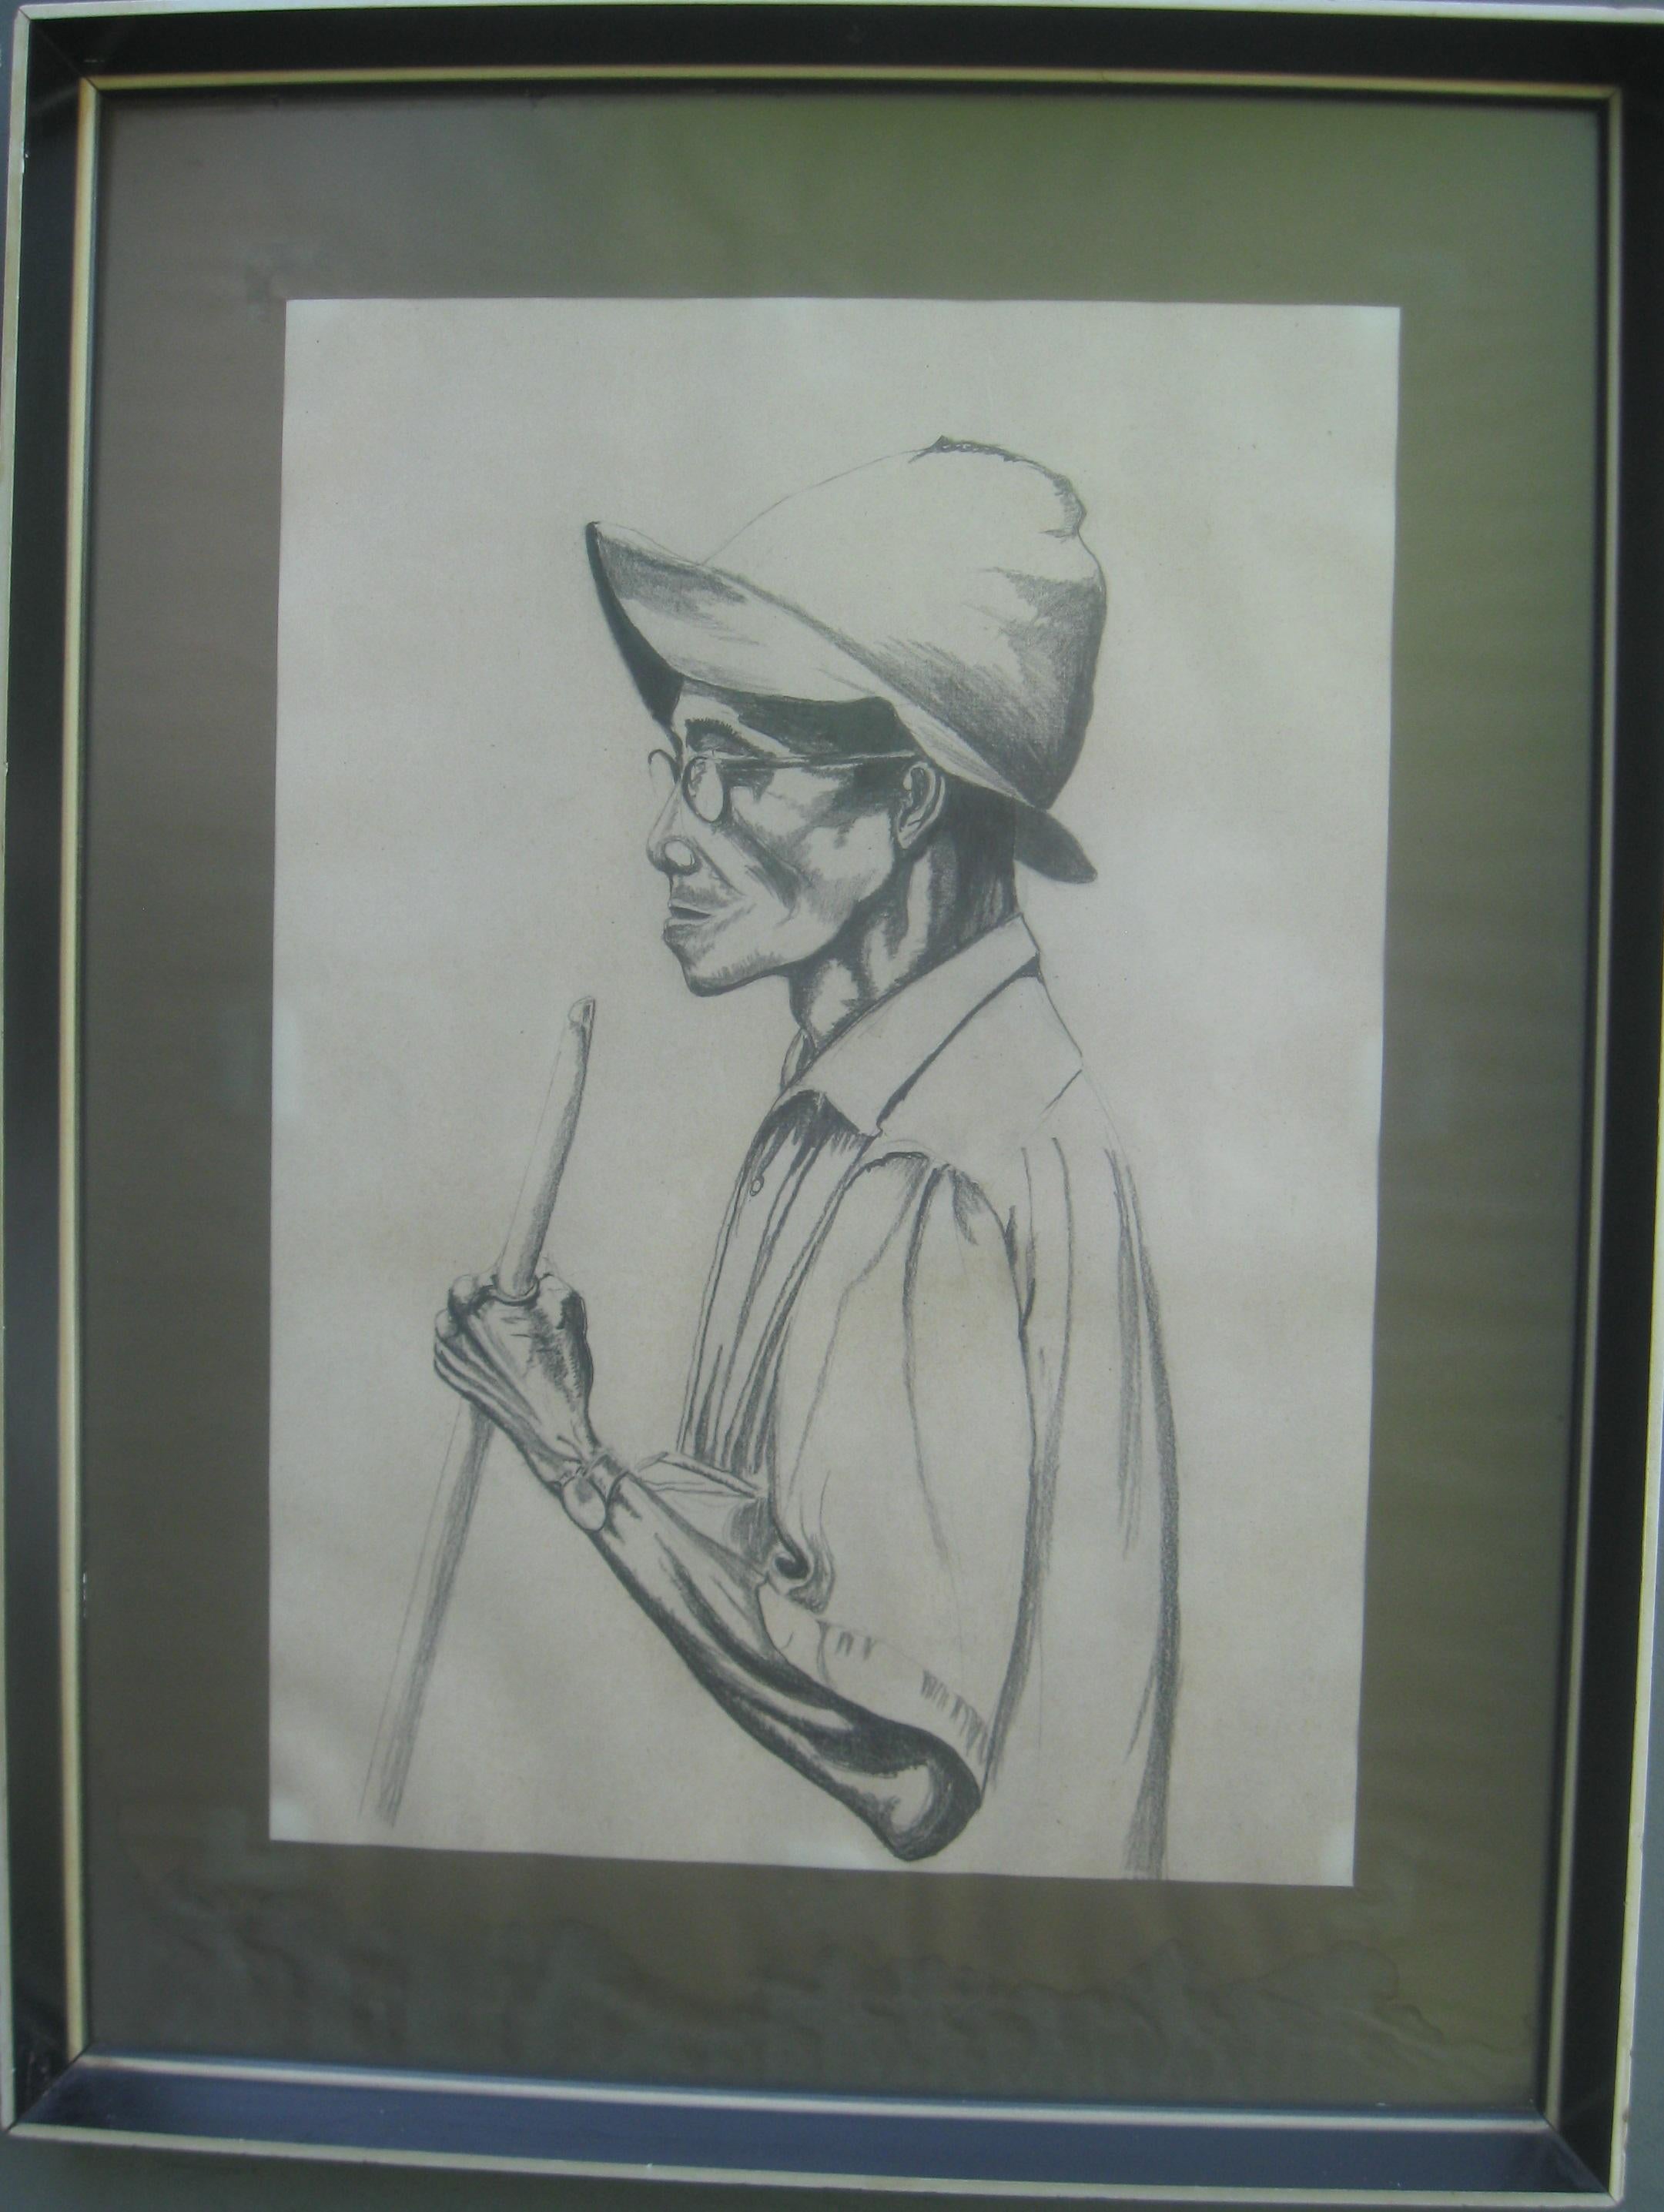 'Portrait of a Tribesman.'  Pencil and Conte crayon on paper circa 1960's.  - Art by Unknown